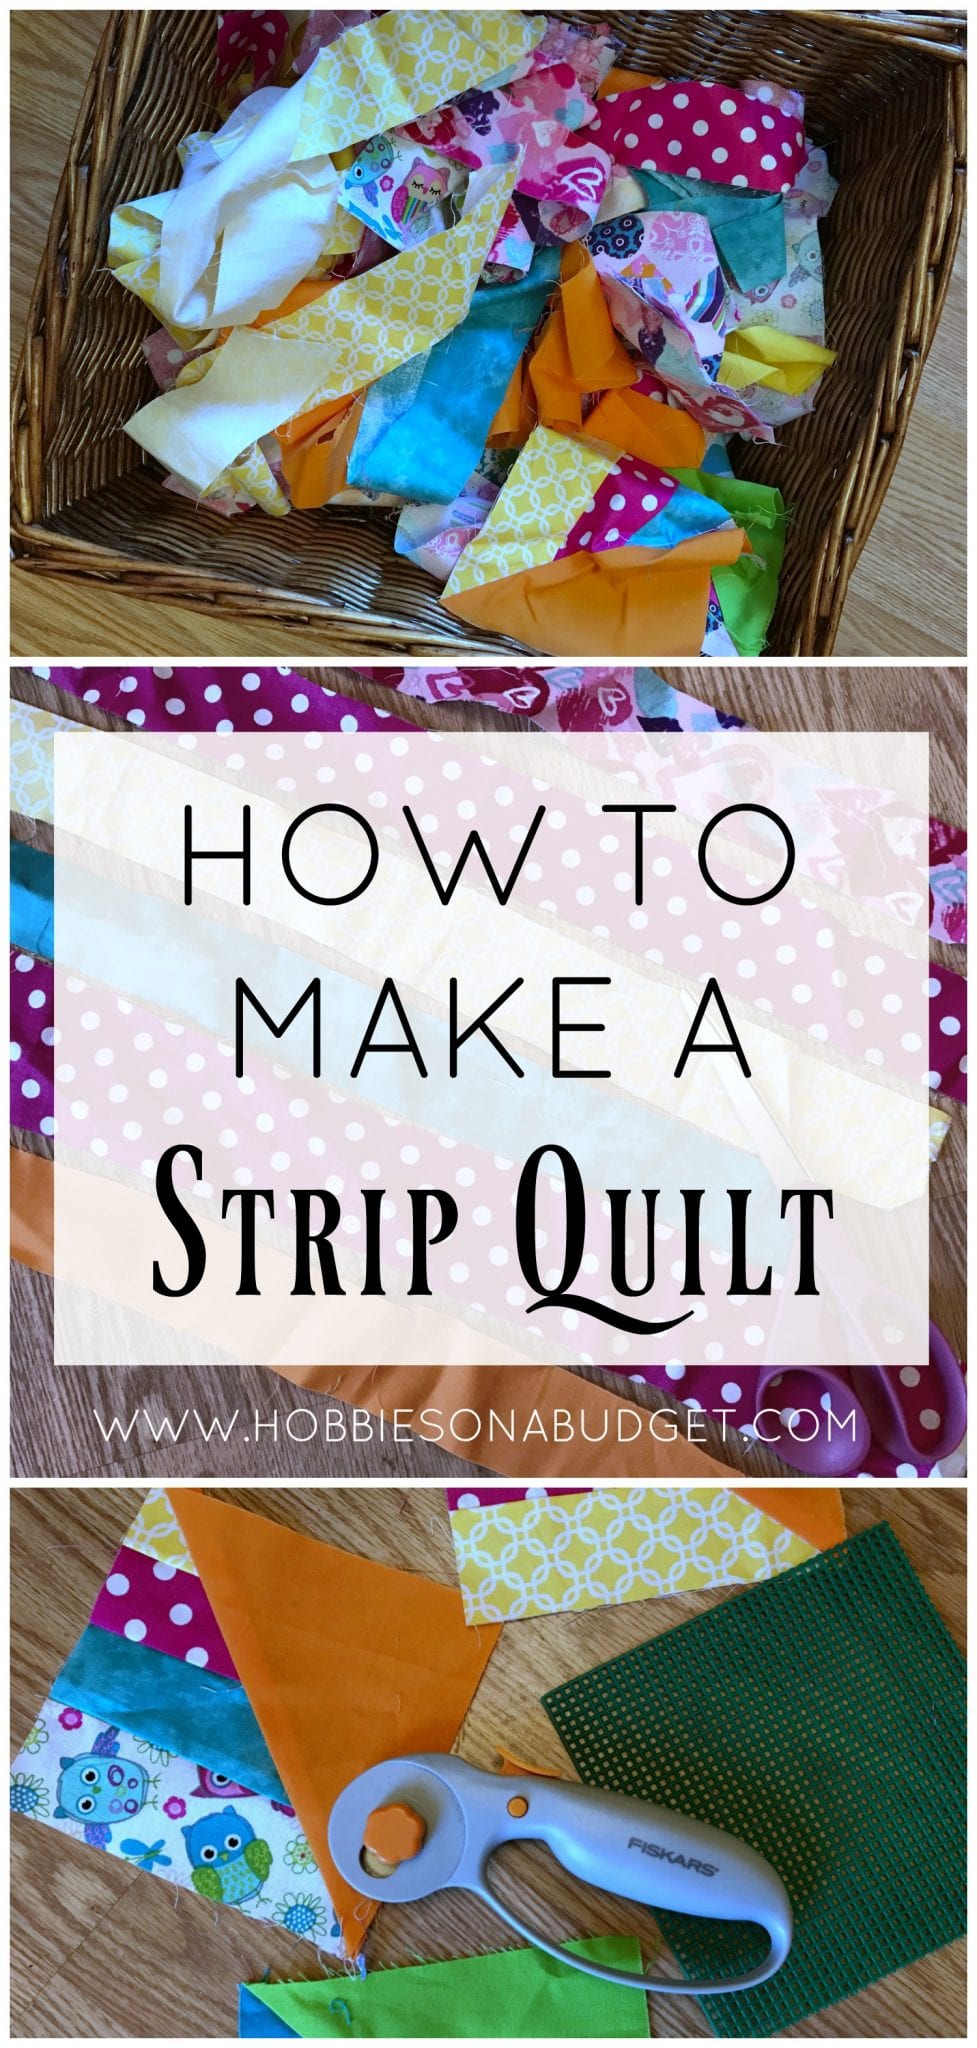 How to make a strip quilt